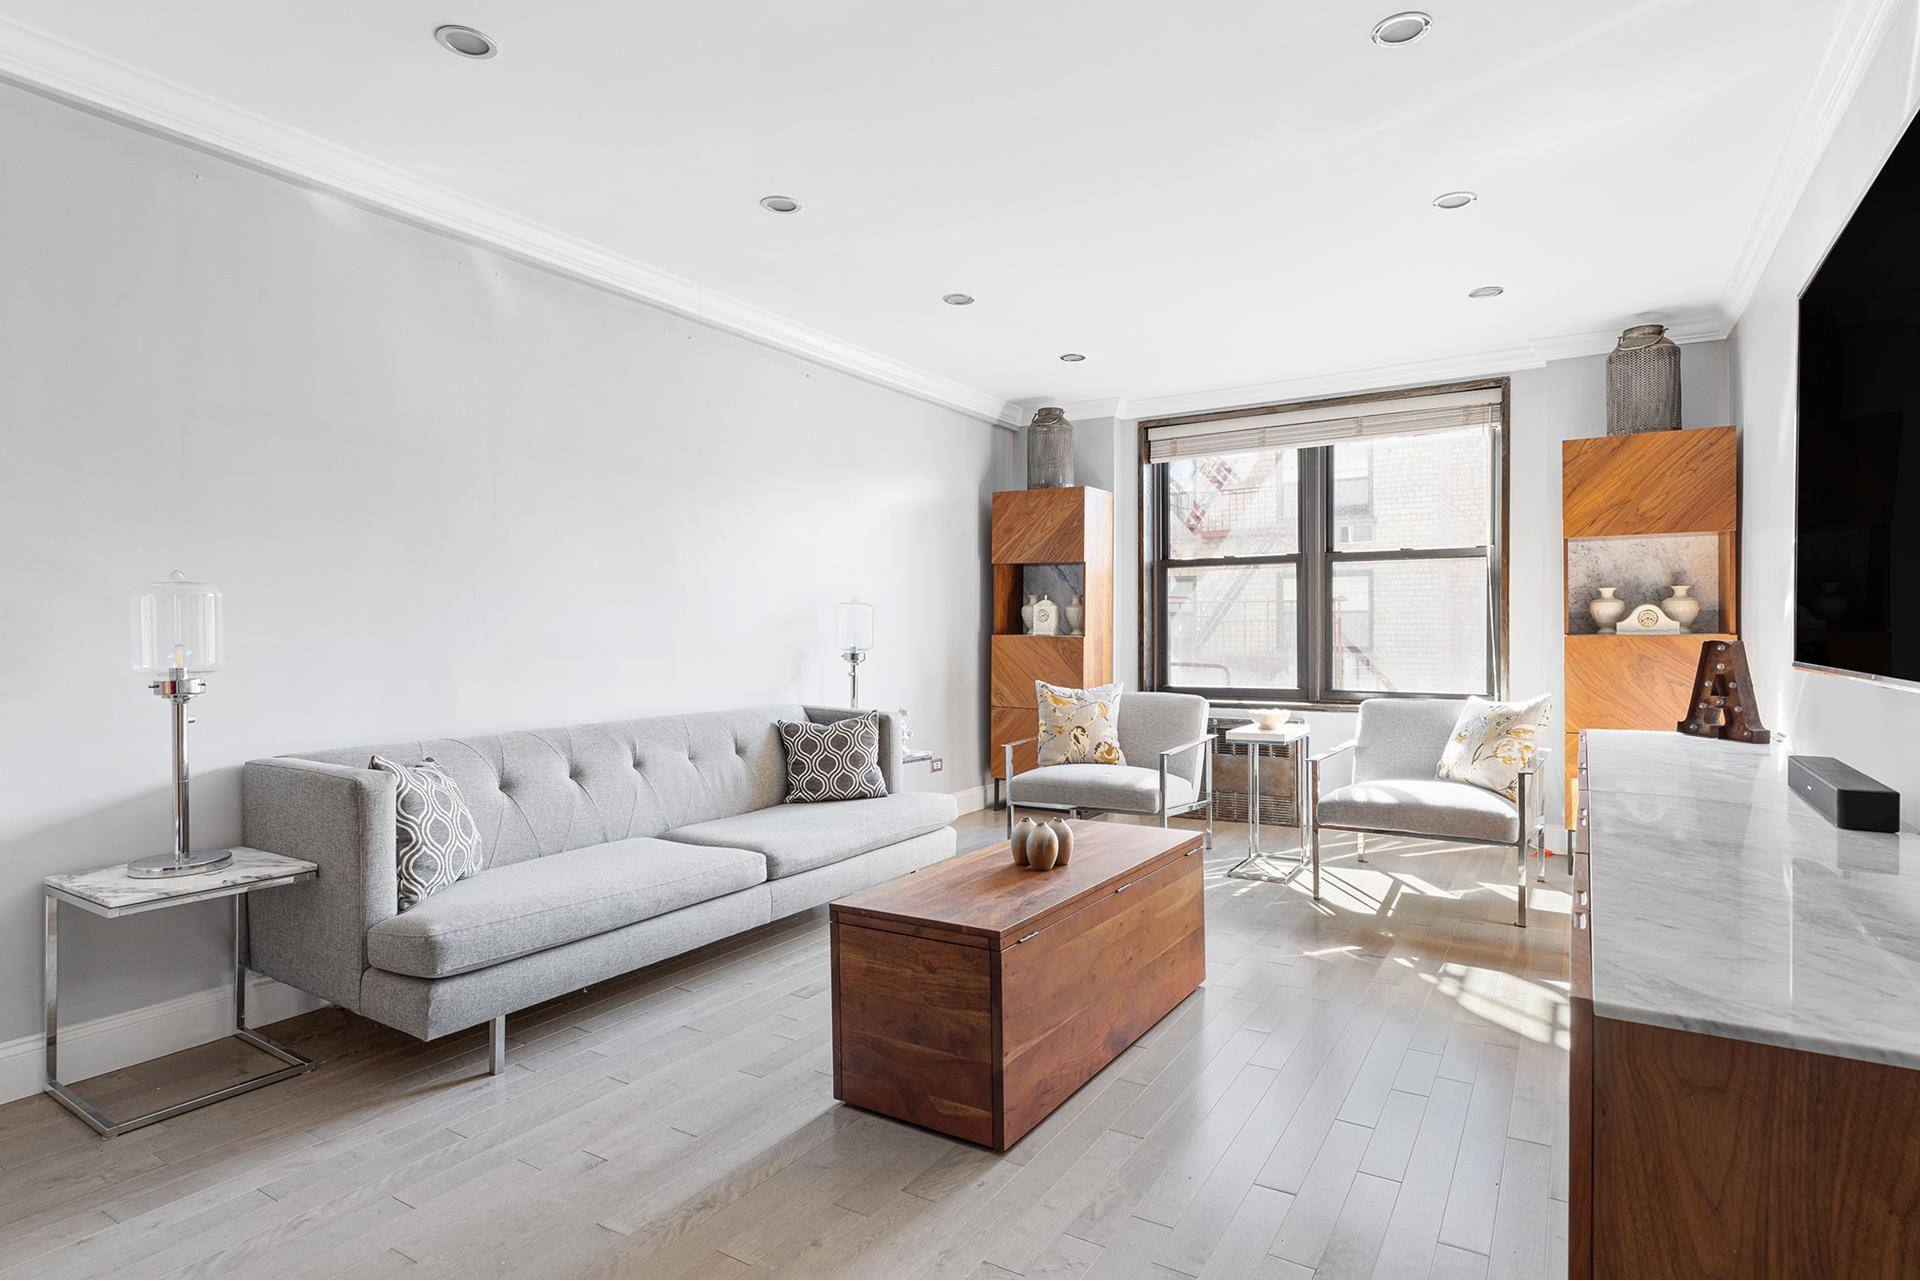 165 Christopher Street, Unit 5Z is the largest sized 1 bedroom in the building, which is located on a historic block in the charming West Village.